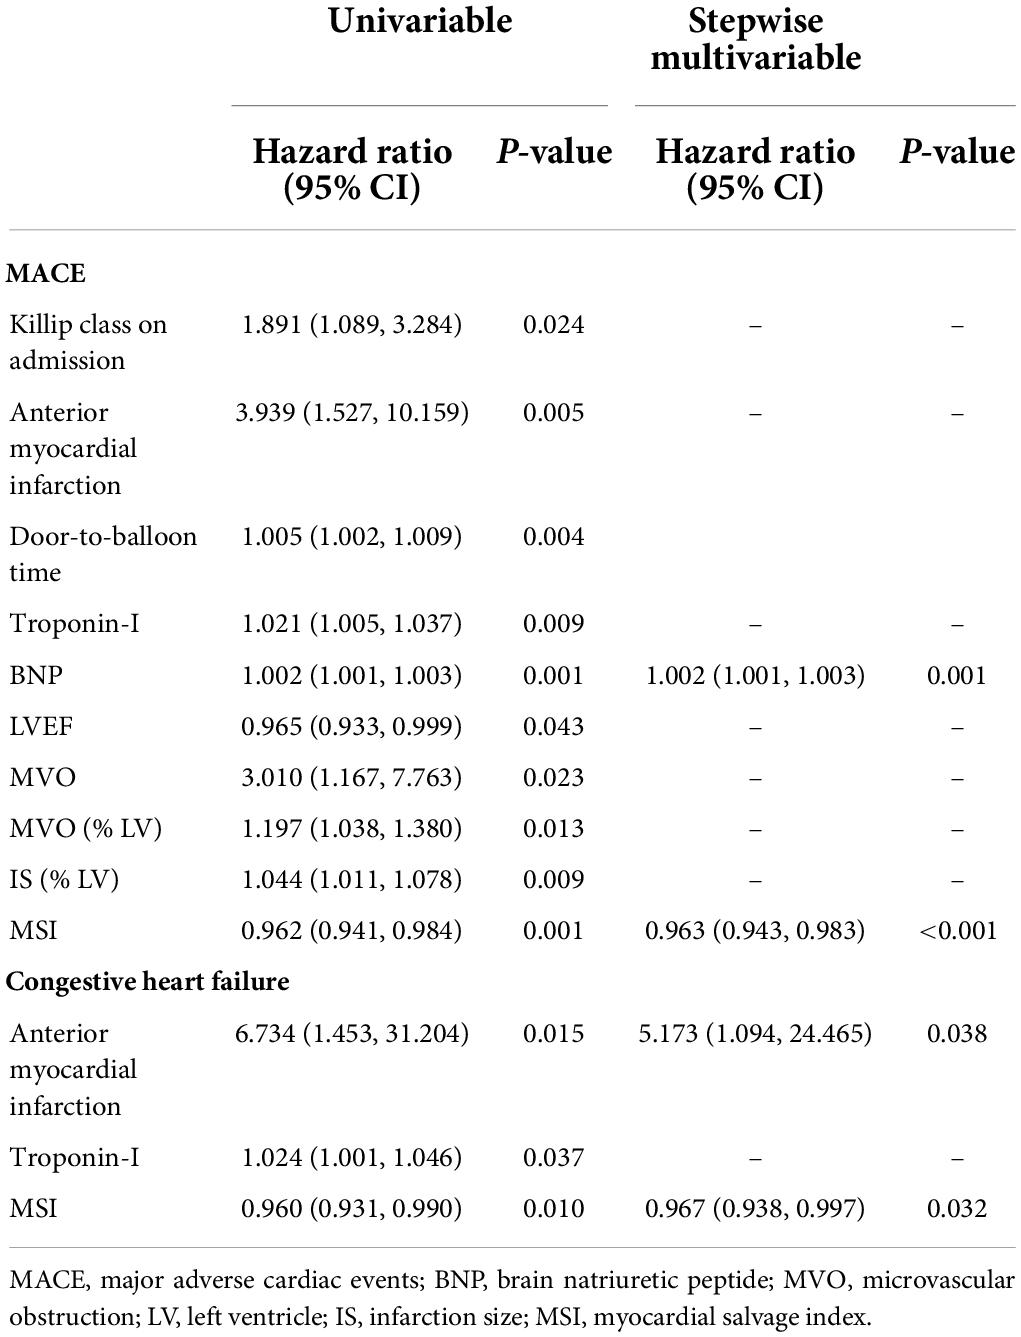 Frontiers Prognostic Value Of Myocardial Salvage Index Assessed By Cardiovascular Magnetic